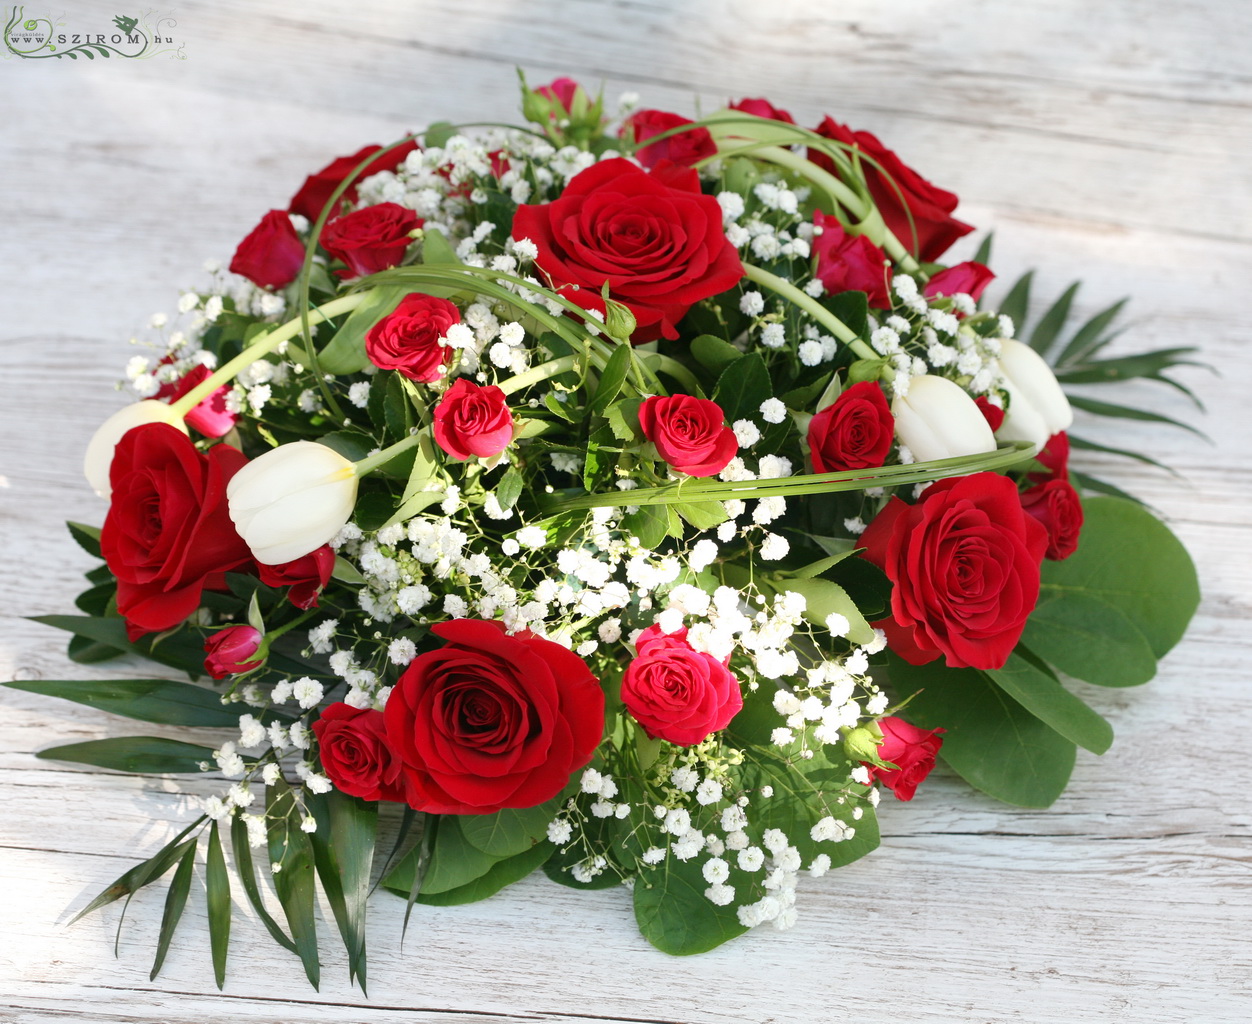 flower delivery Budapest - Centerpiece (tulip, rose, white, red), wedding